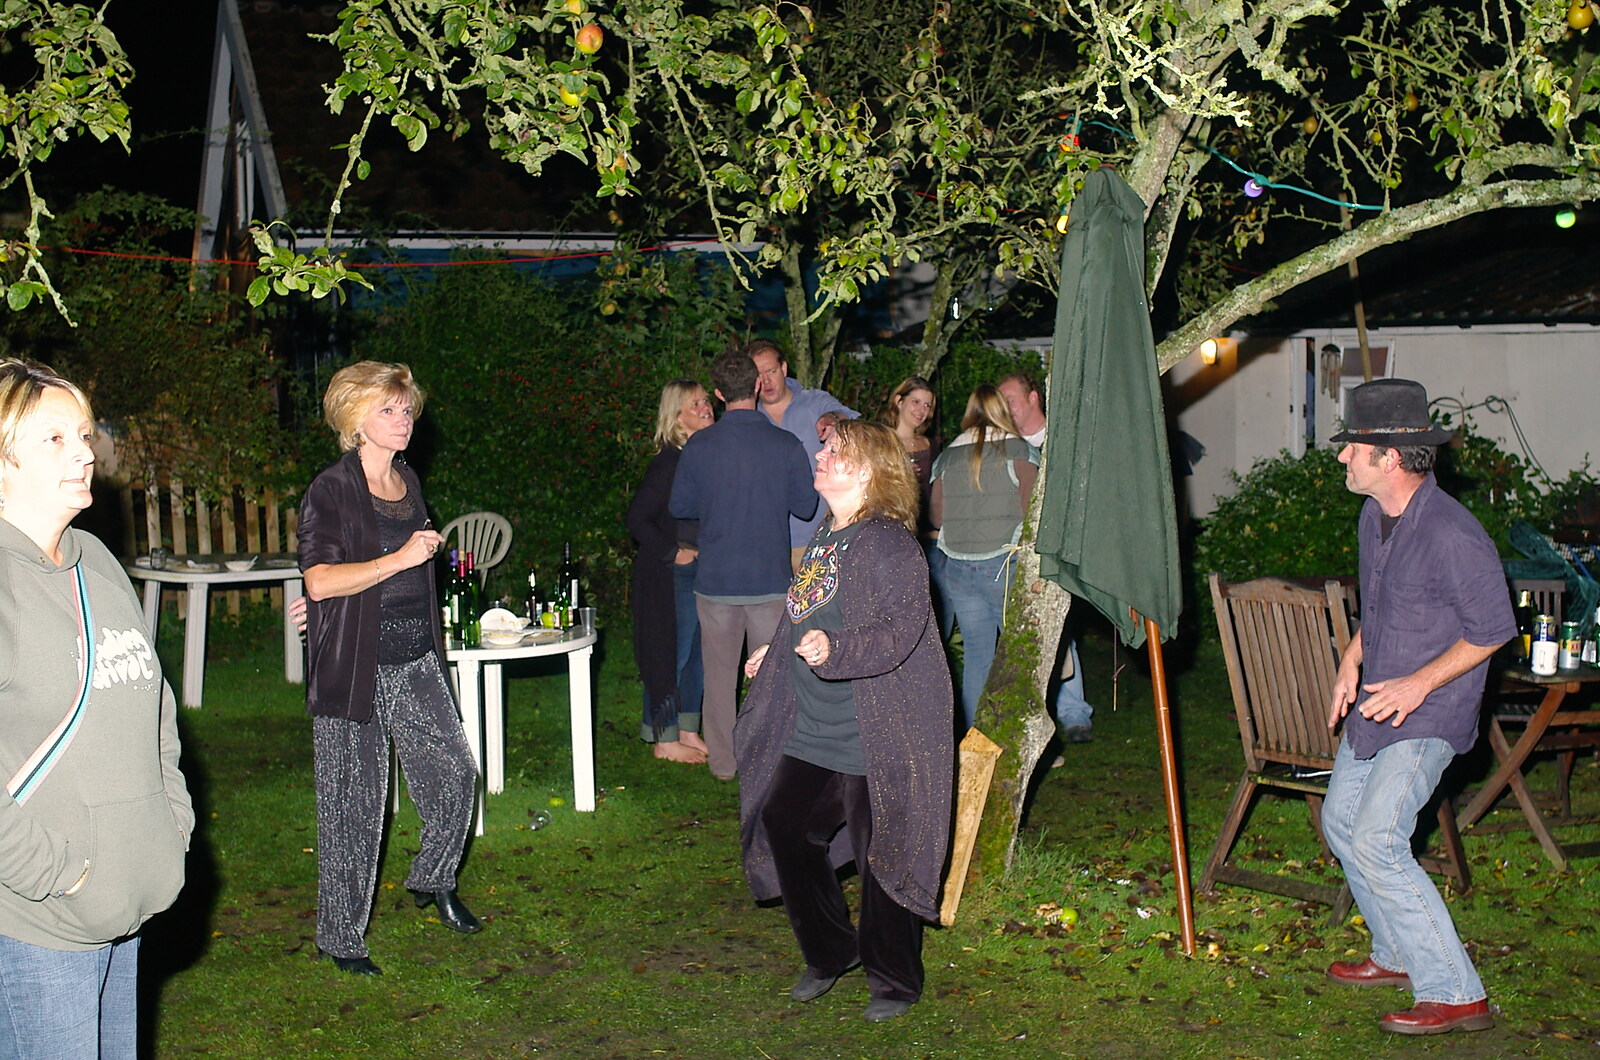 Jo and Steph's Party, Burston, Norfolk - 30th September 2005: Dancing under a tree